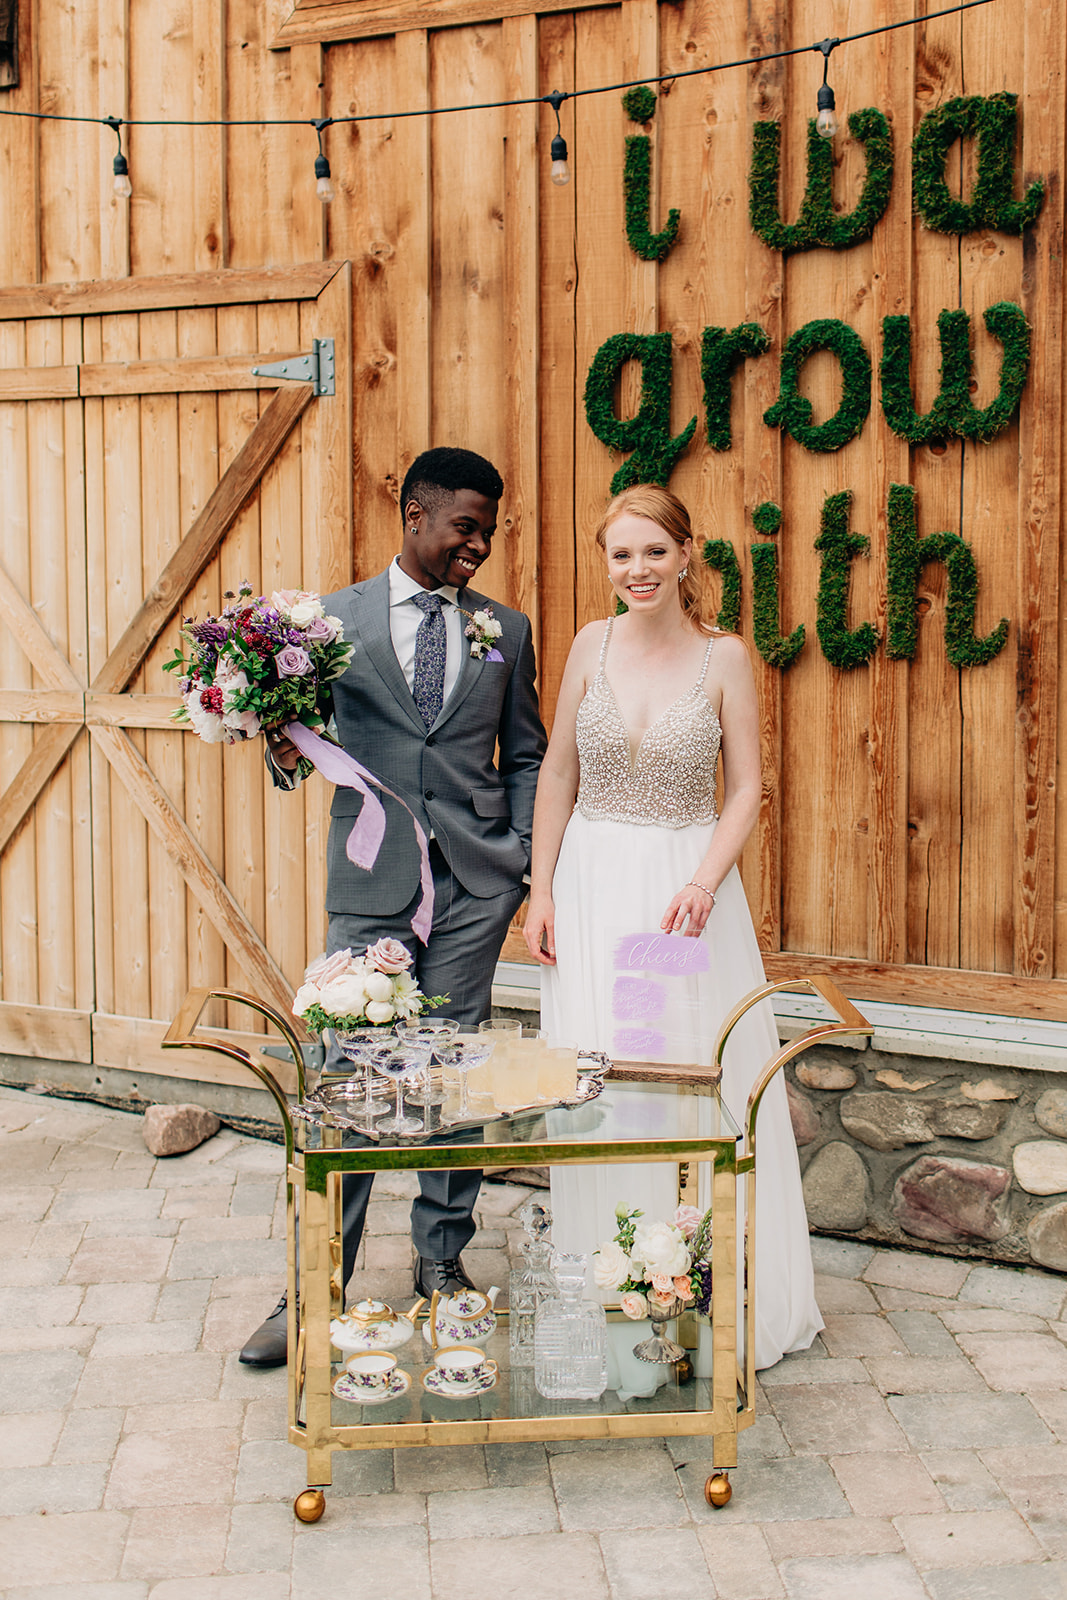 Purple Garden Inspiration at The Coutts Centre - wedding inspiration featured on Bronte Bride